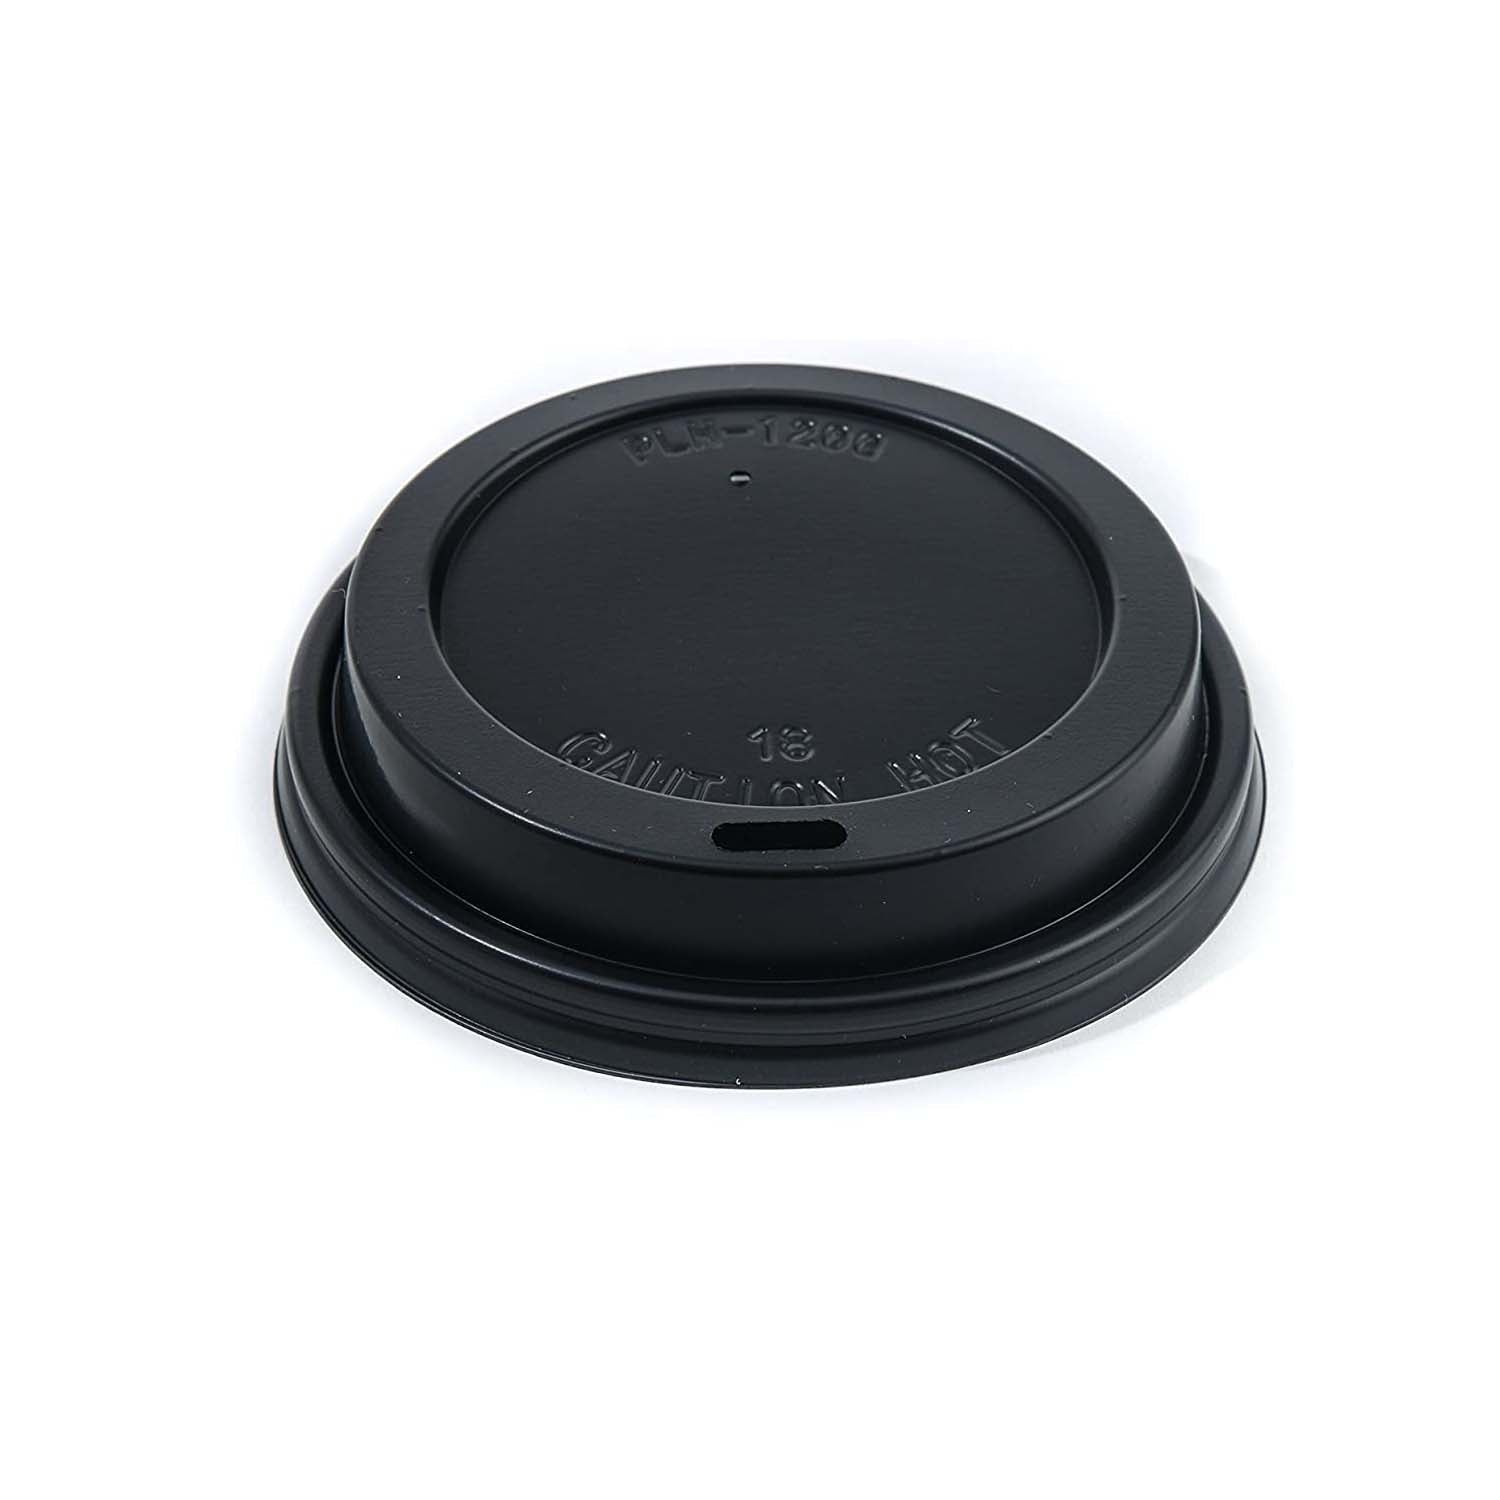 20oz Disposable White Paper Hot Cold Cups with Black Dome Lids